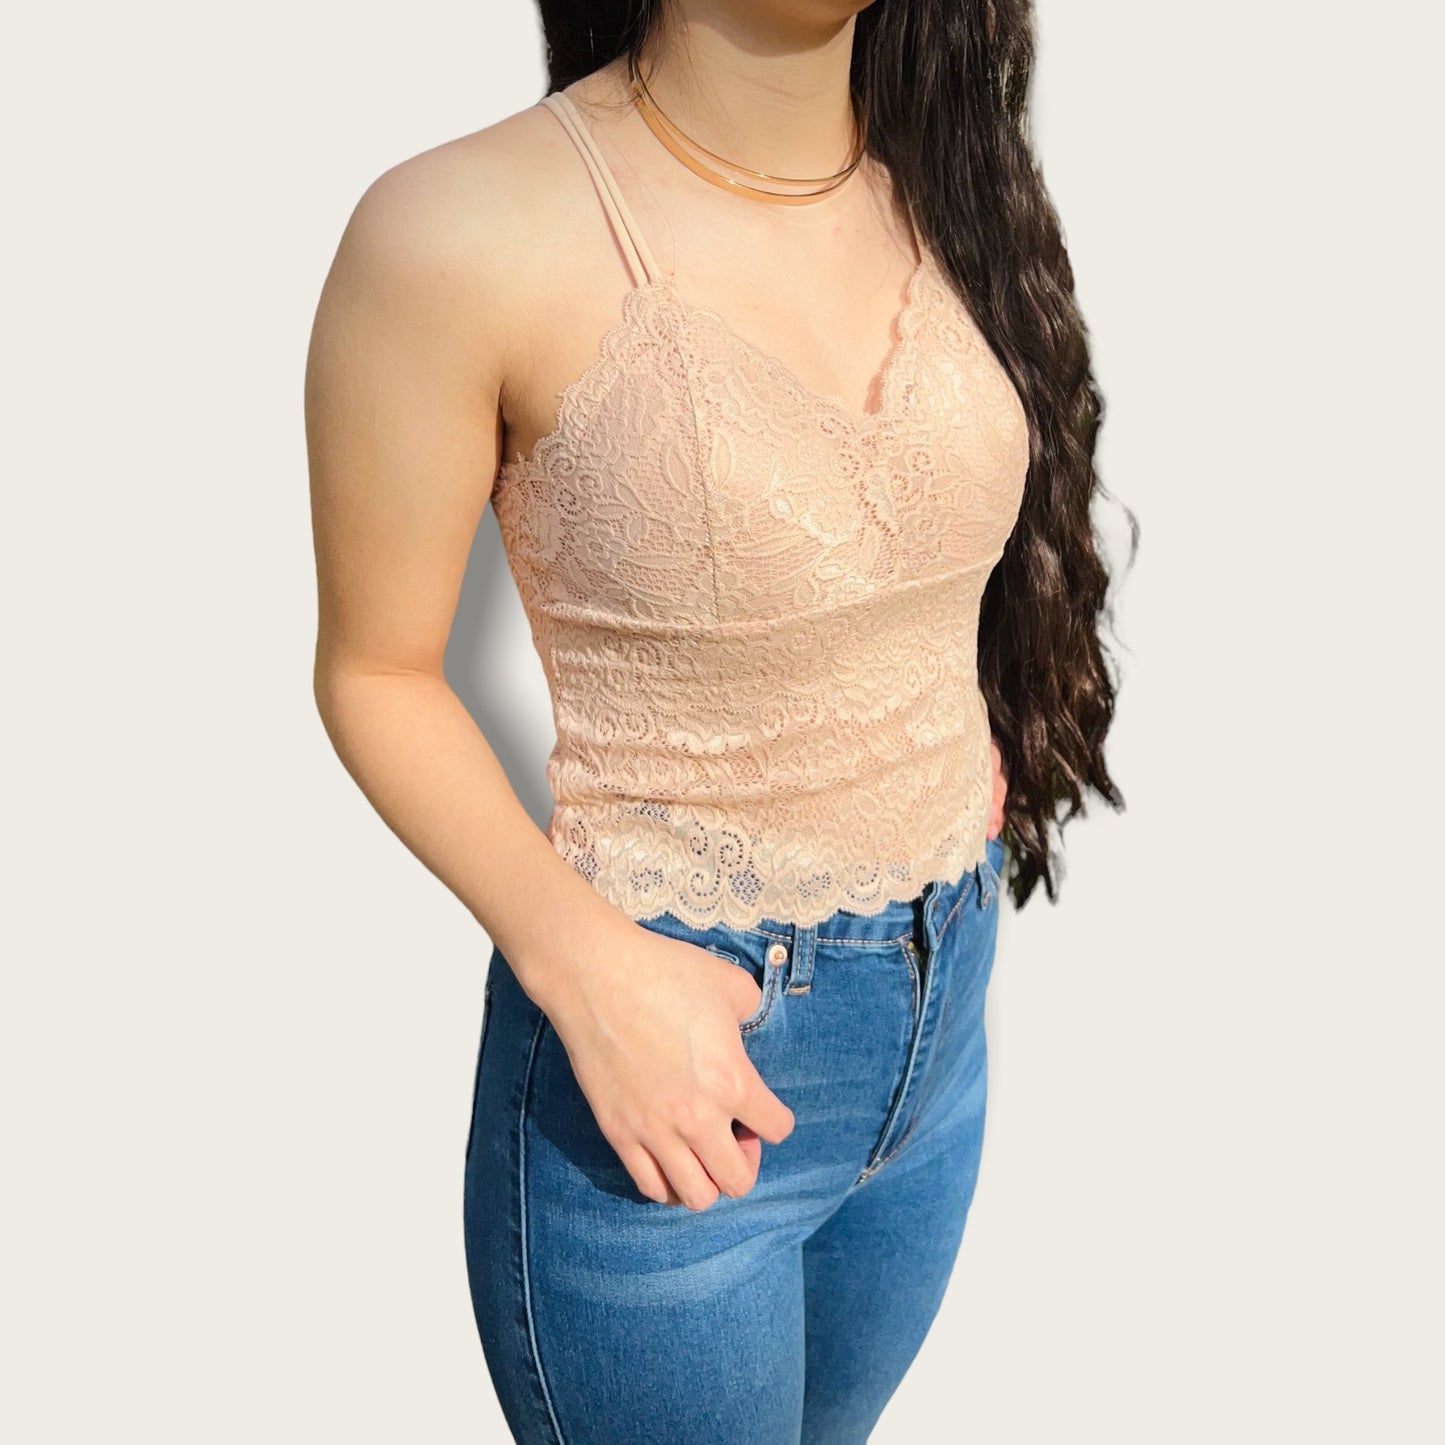 Tana Lace Bralette Top - Offbeat Boutique